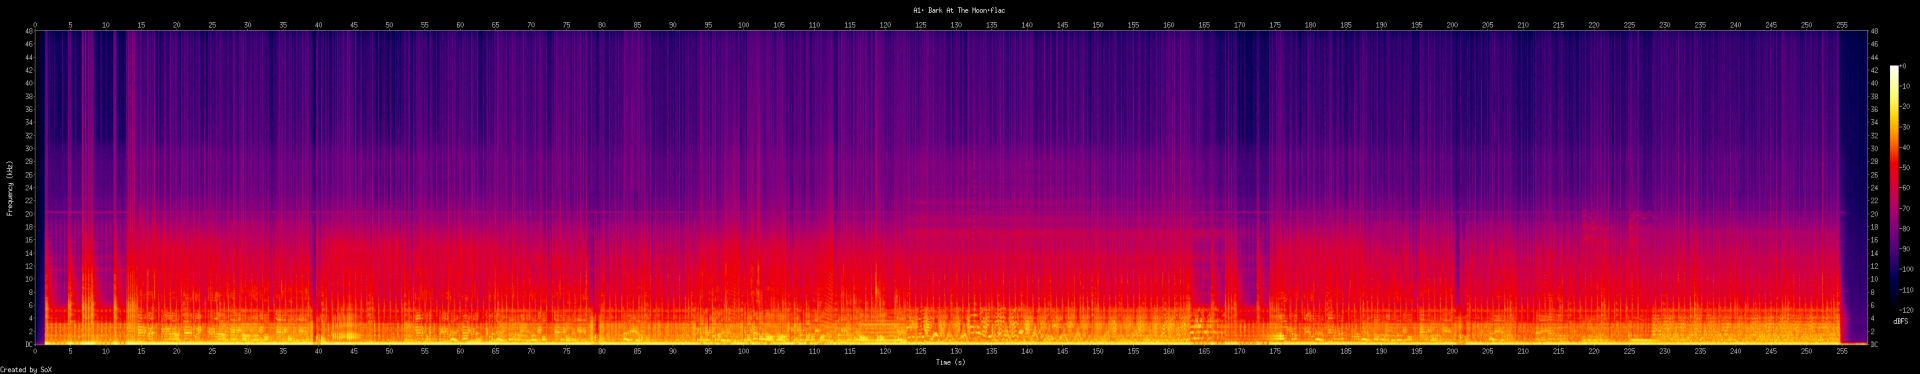 A1. Bark At The Moon_sox_spectrogram.png